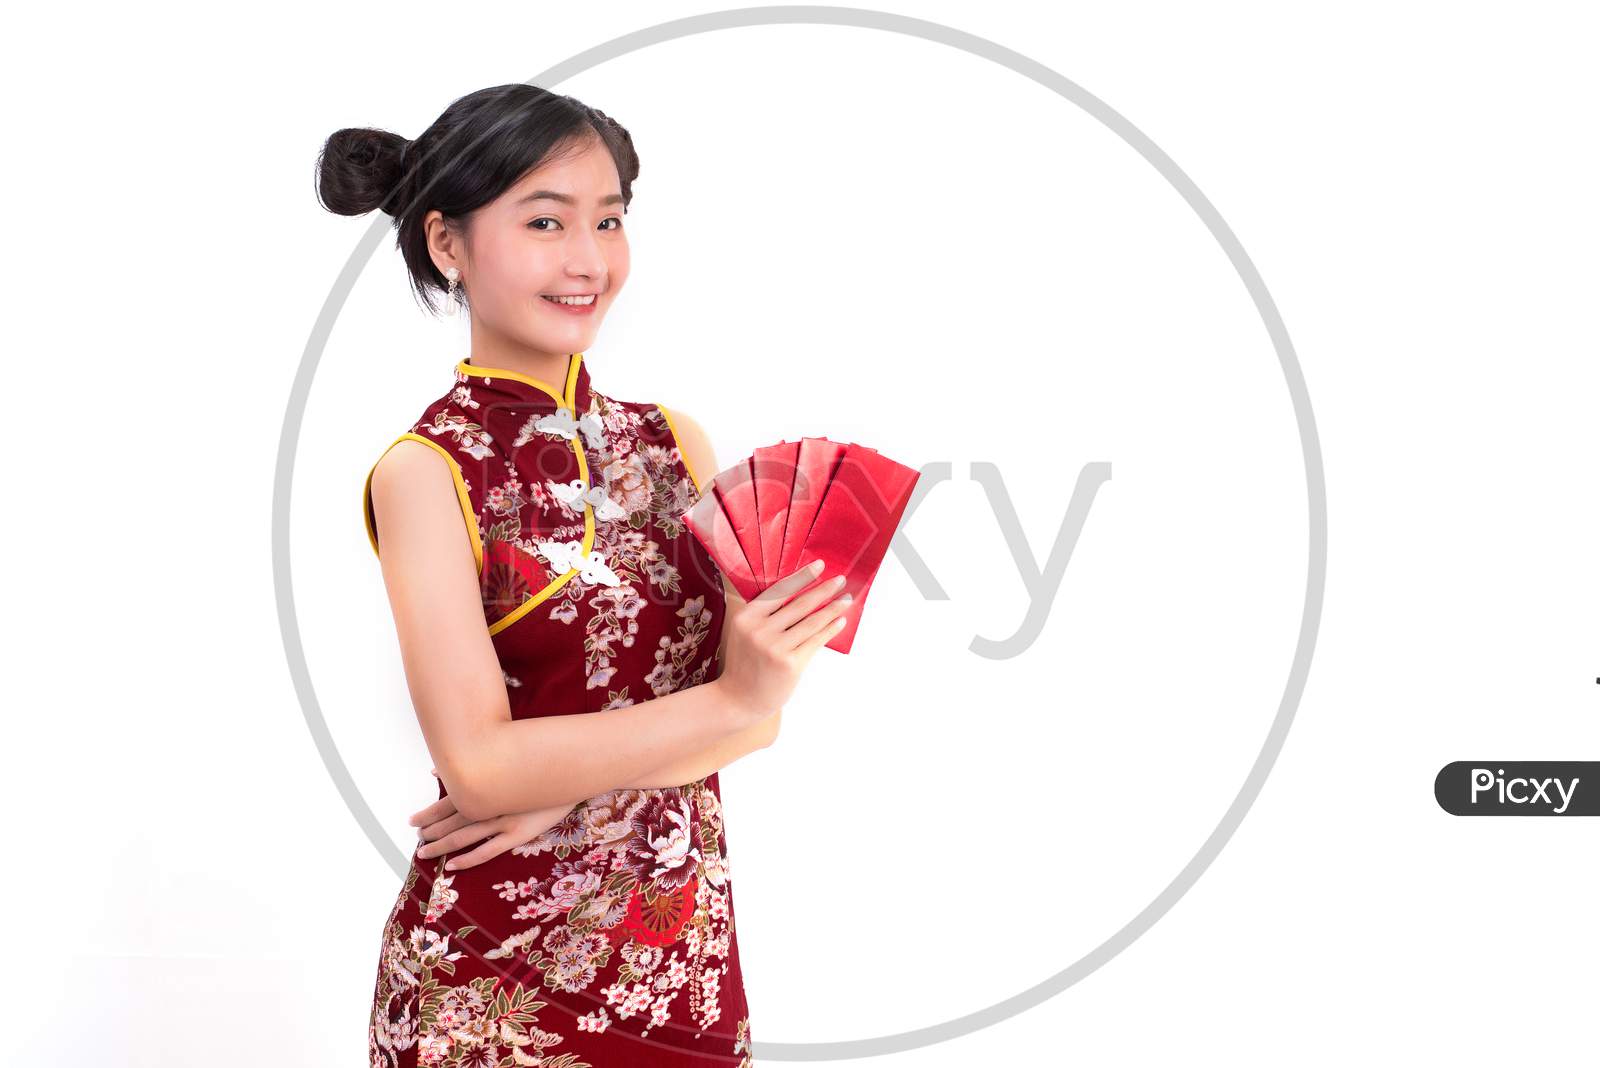 Young Asian Beauty Woman Wearing Cheongsam And Holding Packet Of Moneys Gesture In Chinese New Year Festival Event On Isolated White Background. Holiday And Lifestyle Concept. Qipao Dress Wearing